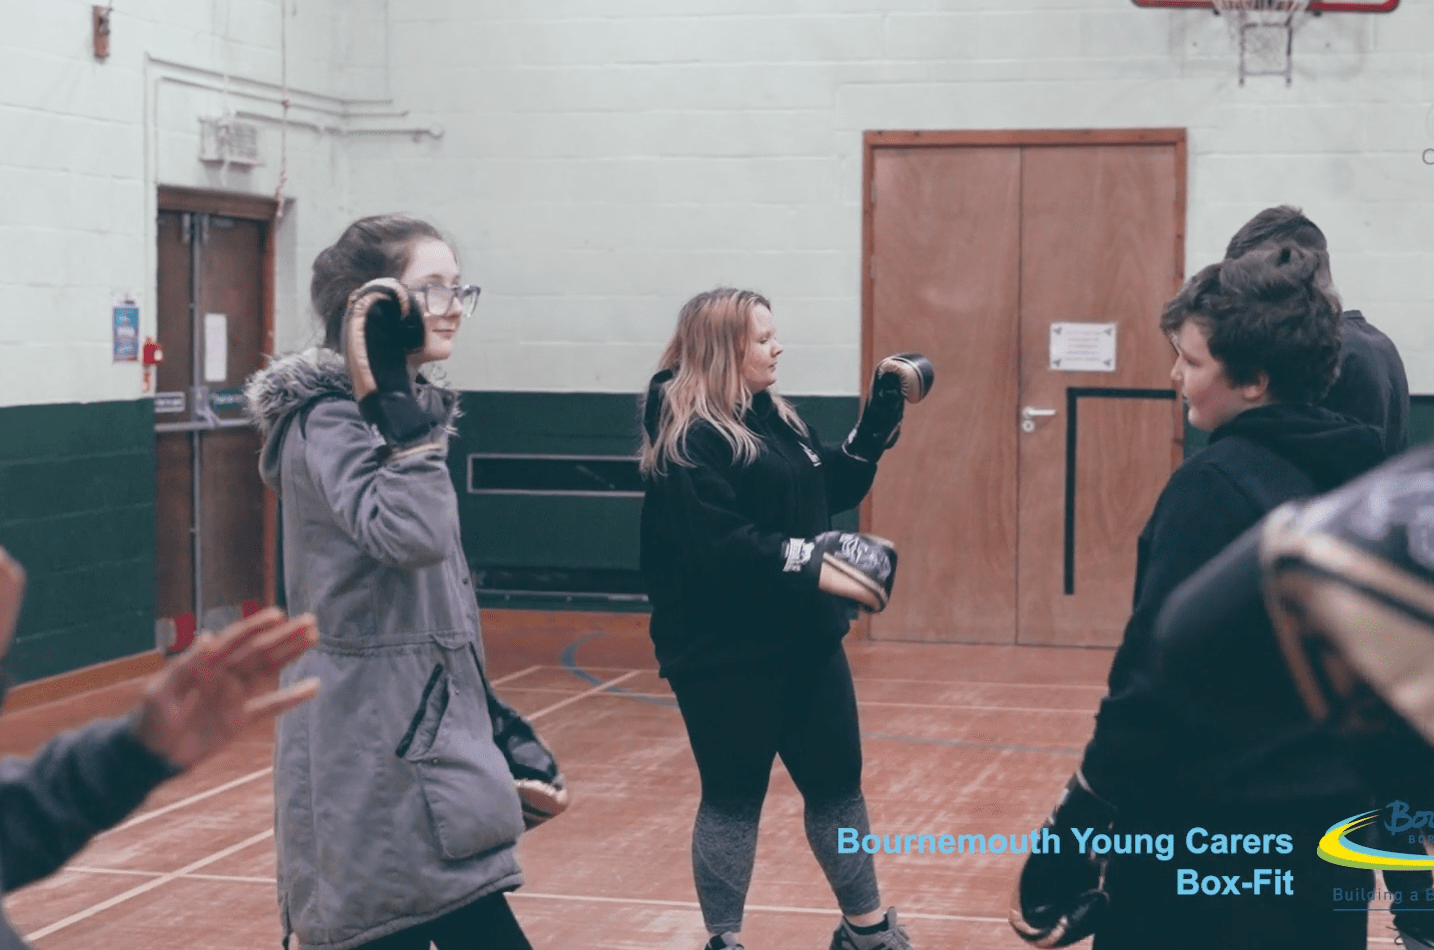 young carers participating in boxing session